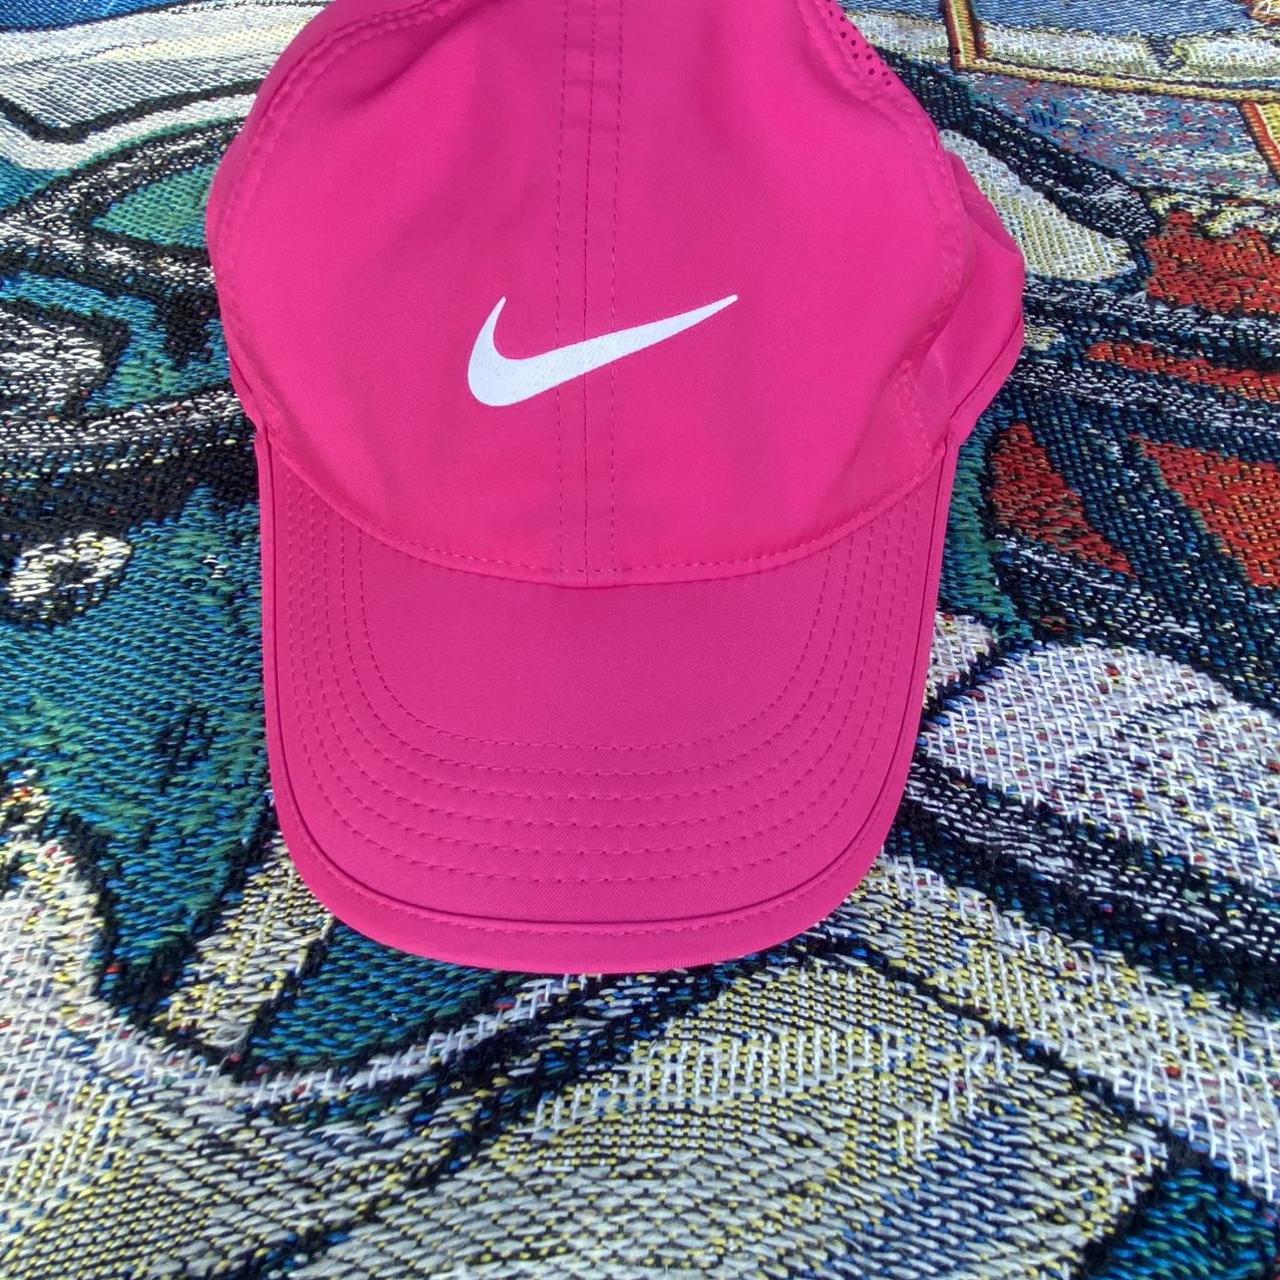 Hot pink Nike Dri fit hat In condition #nike... -